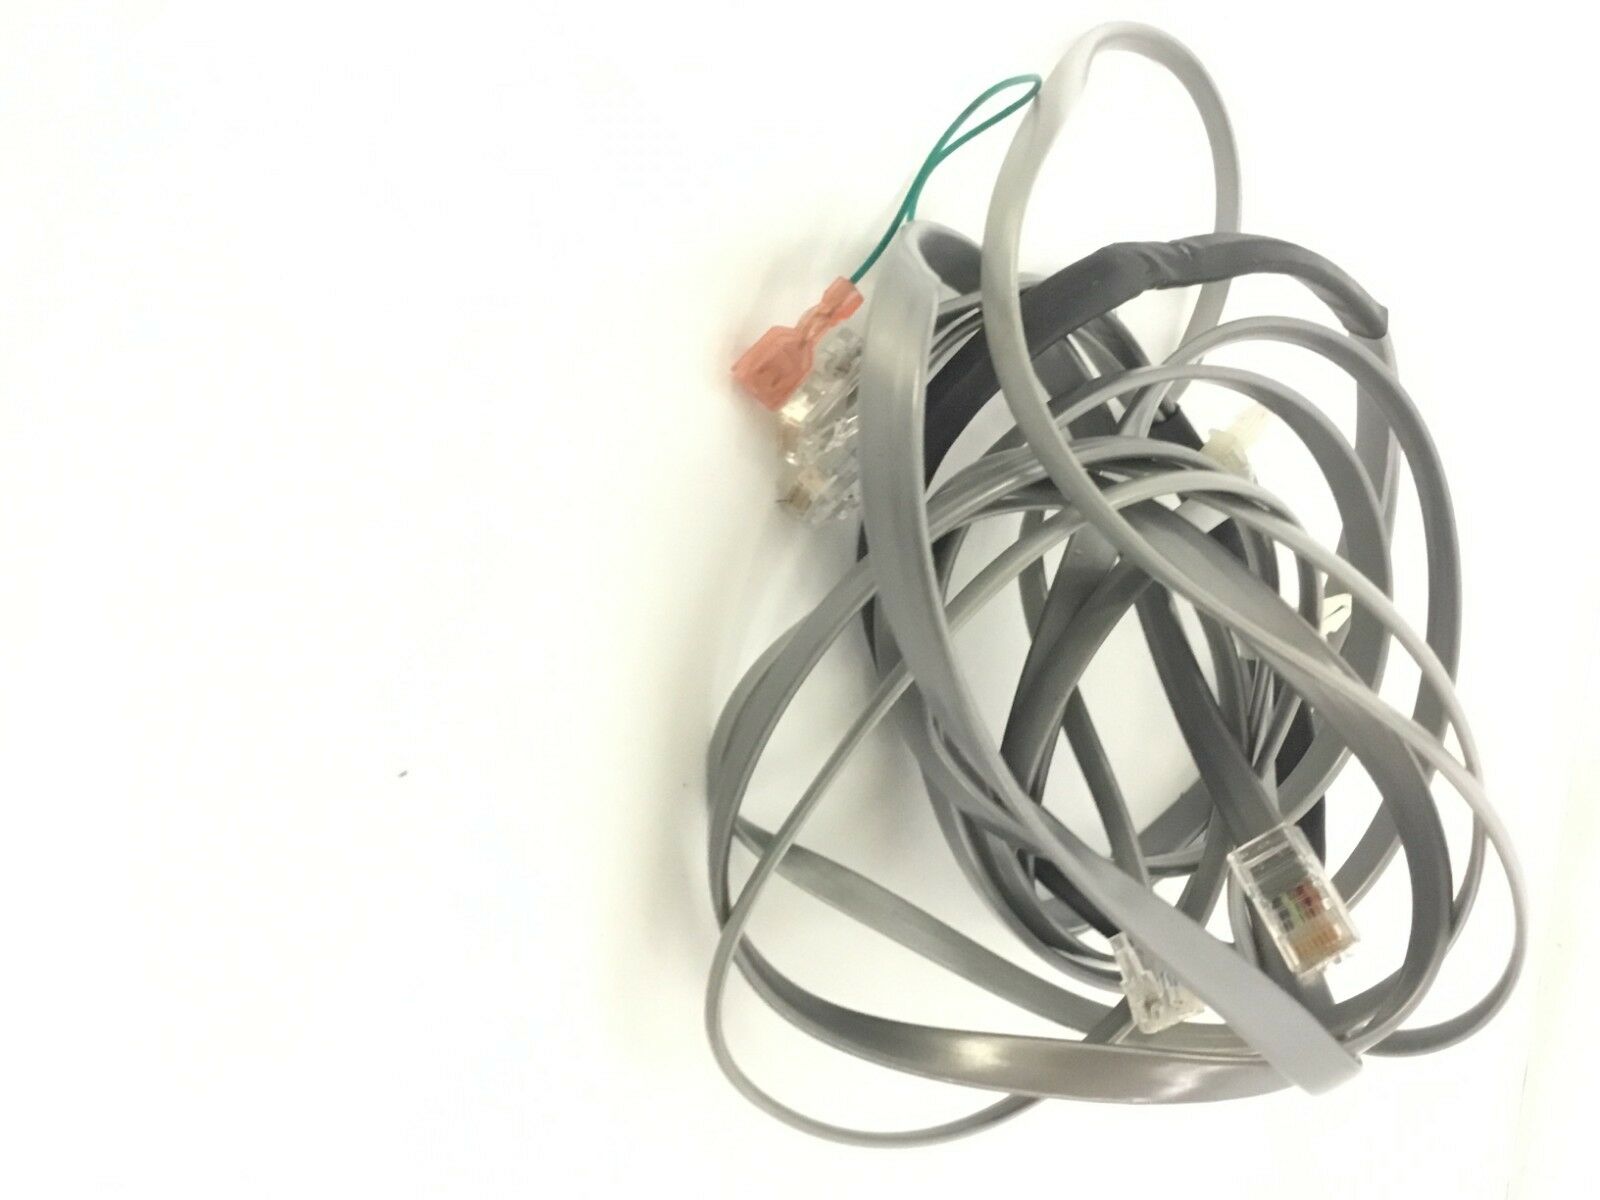 Data Cable OEM Interconnect Wire Harness (Used)